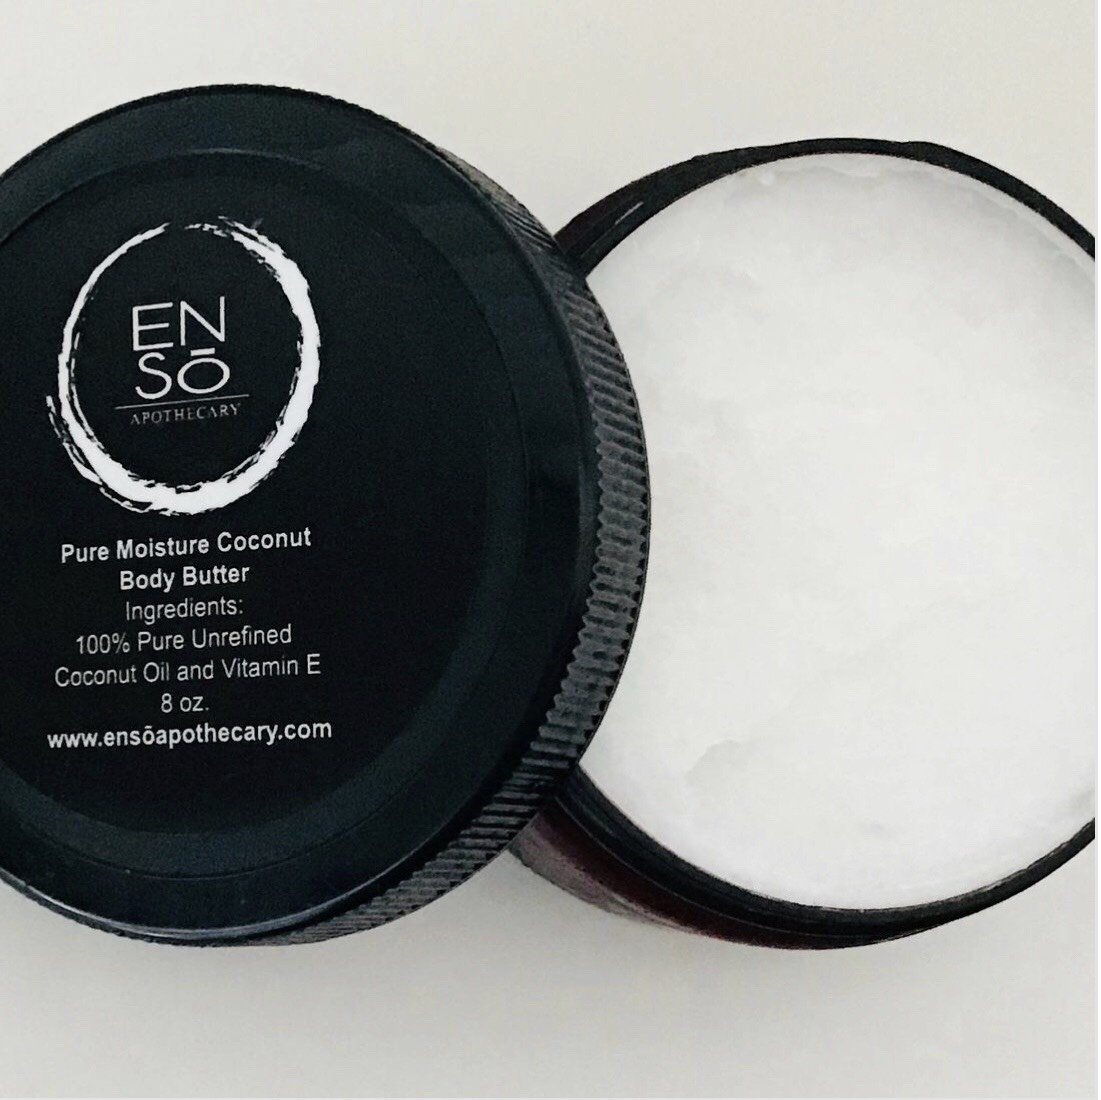 Enso Apothecary Pure Moisture Coconut Body Butter